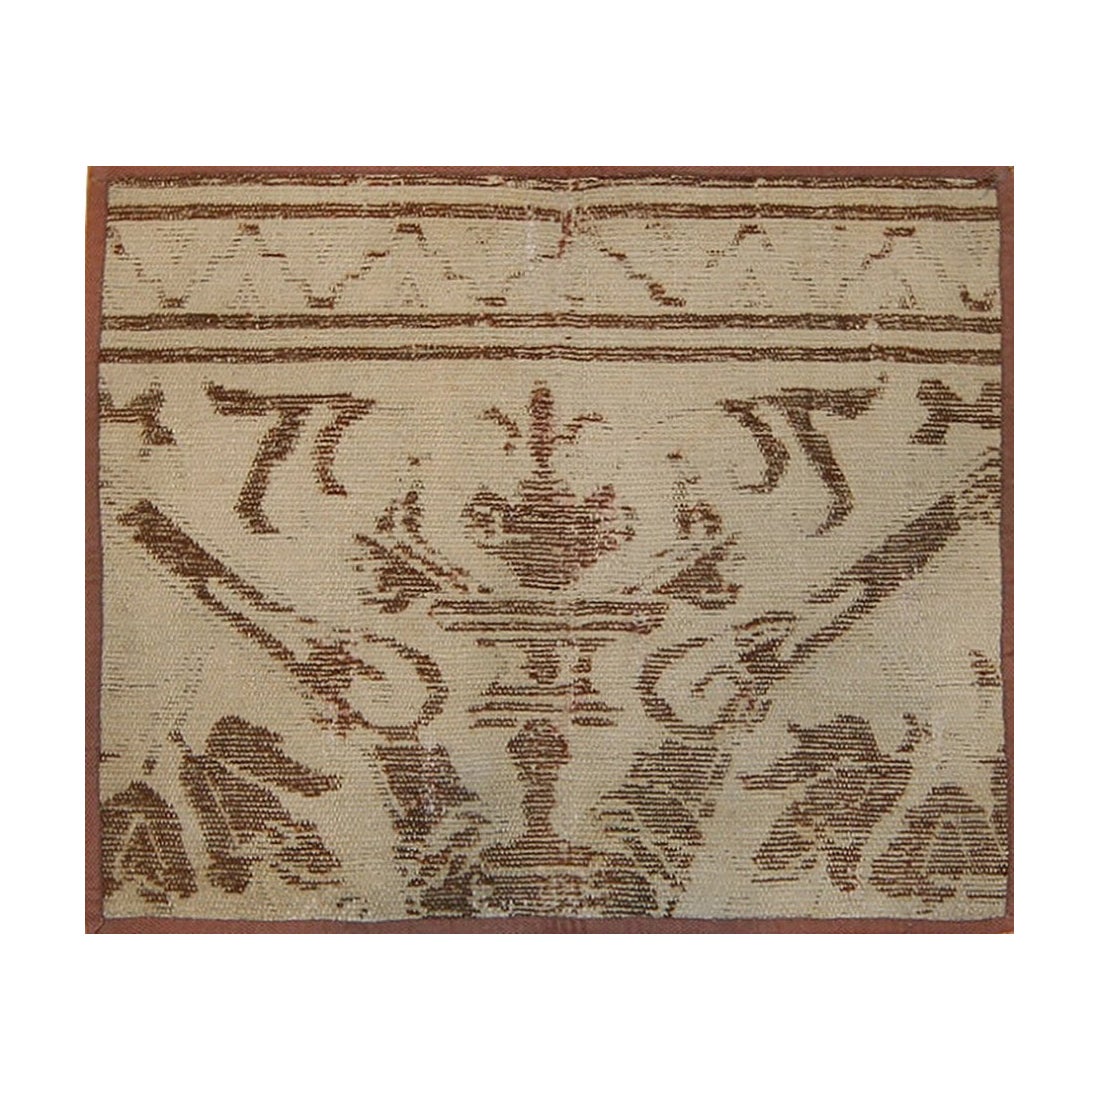 Rare 16th Century Alcaraz Rug Fragment from Spain 1'6" x 1'11" For Sale